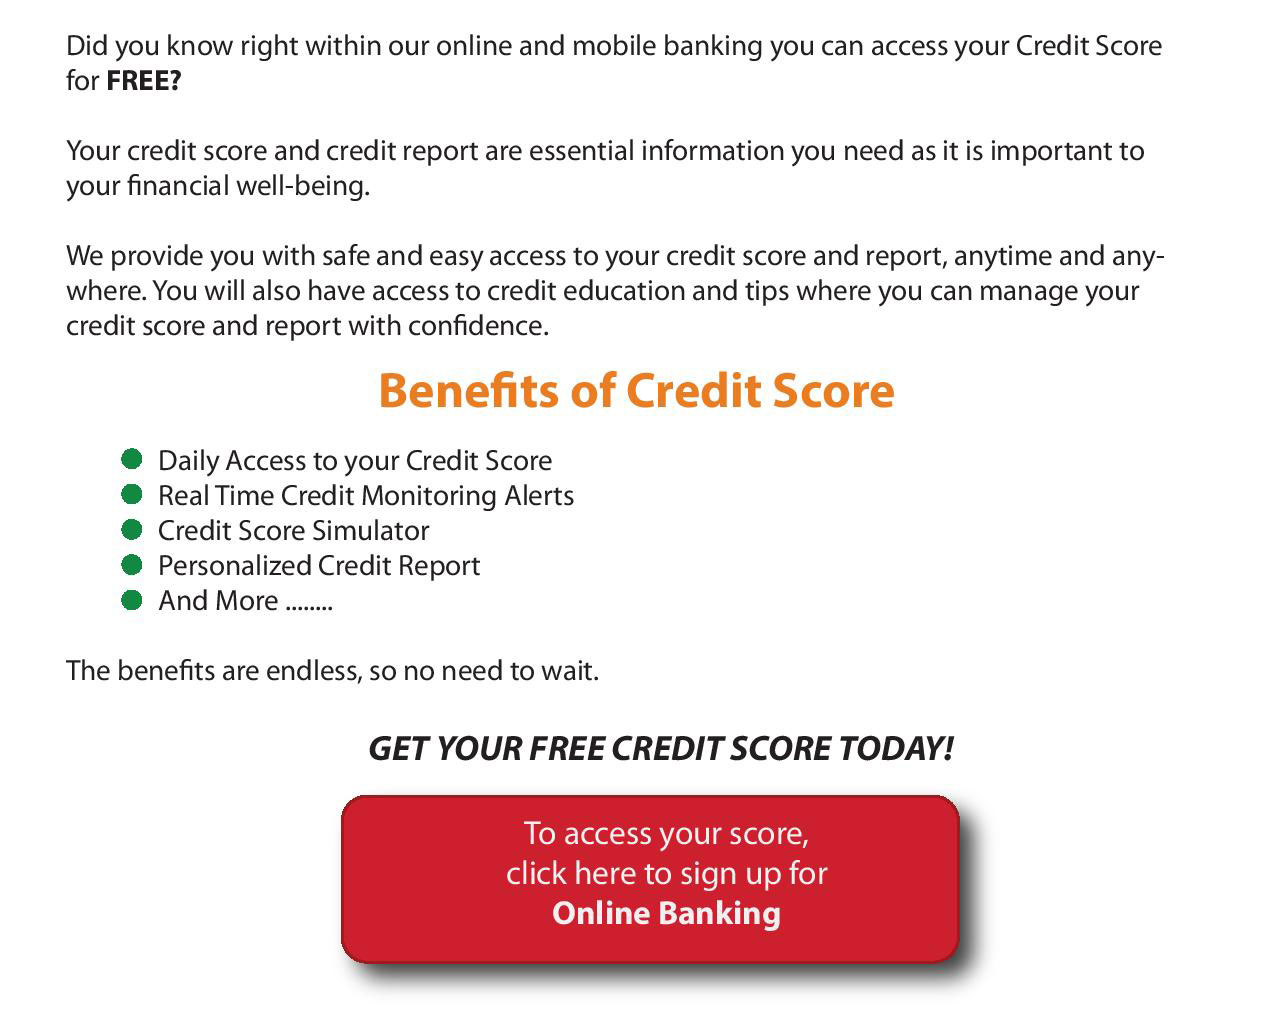 To access your score, sign into home banking